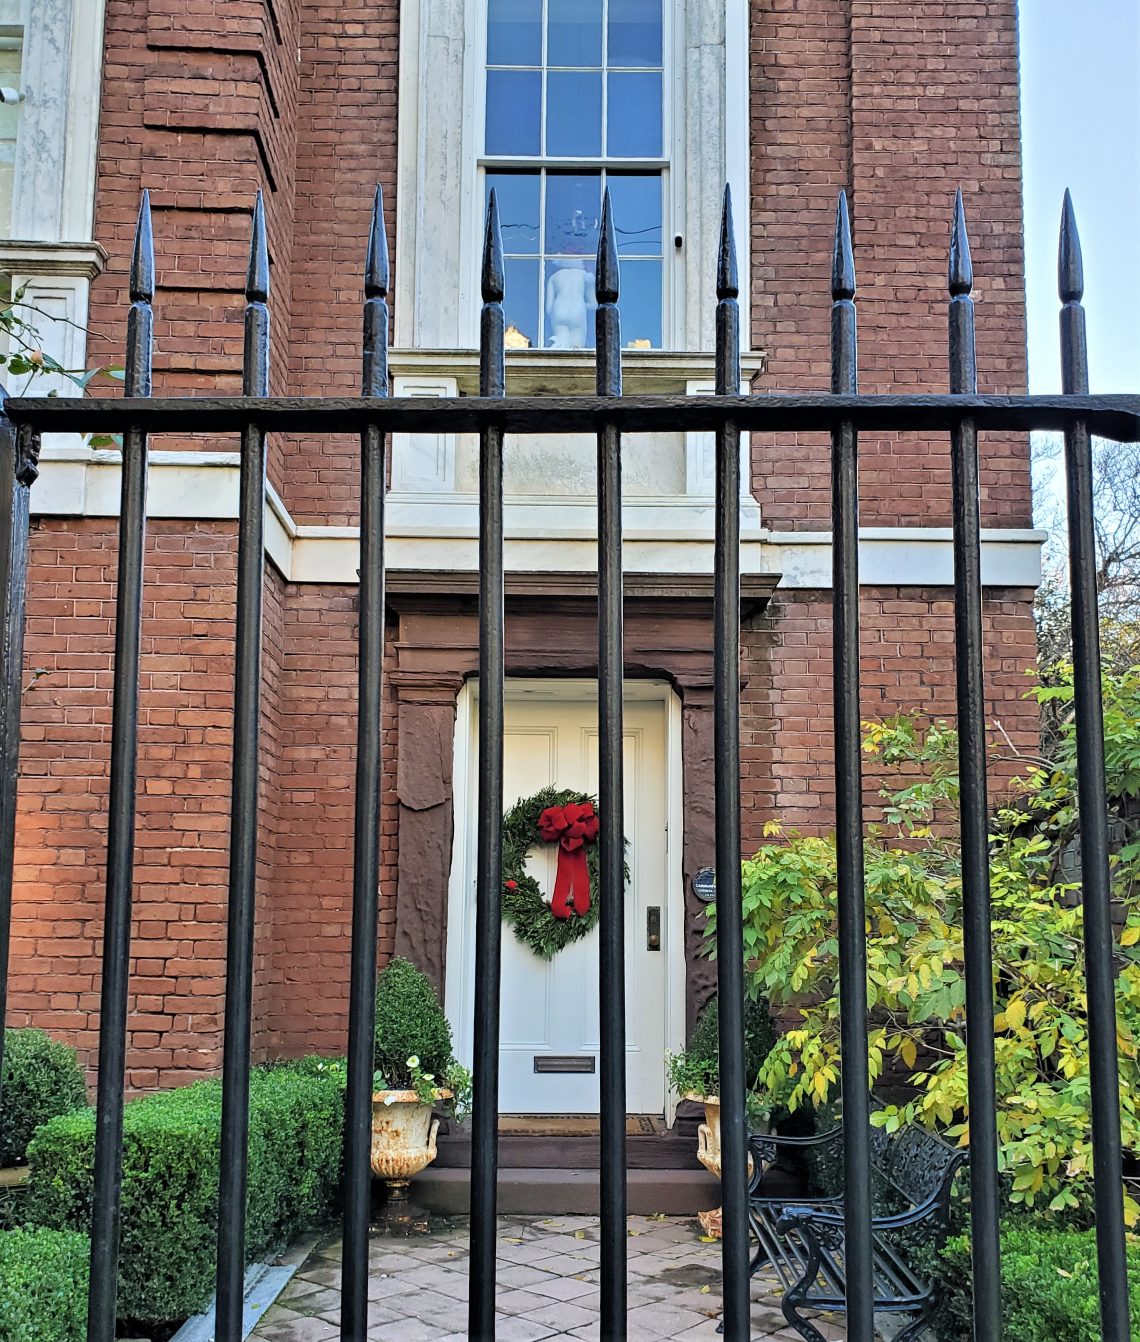 The rear of the statue in the second floor window of this imposing house on Legare Street always catches my eye, even when the house is decorated for the holidays. I often wonder if this view is intentional.